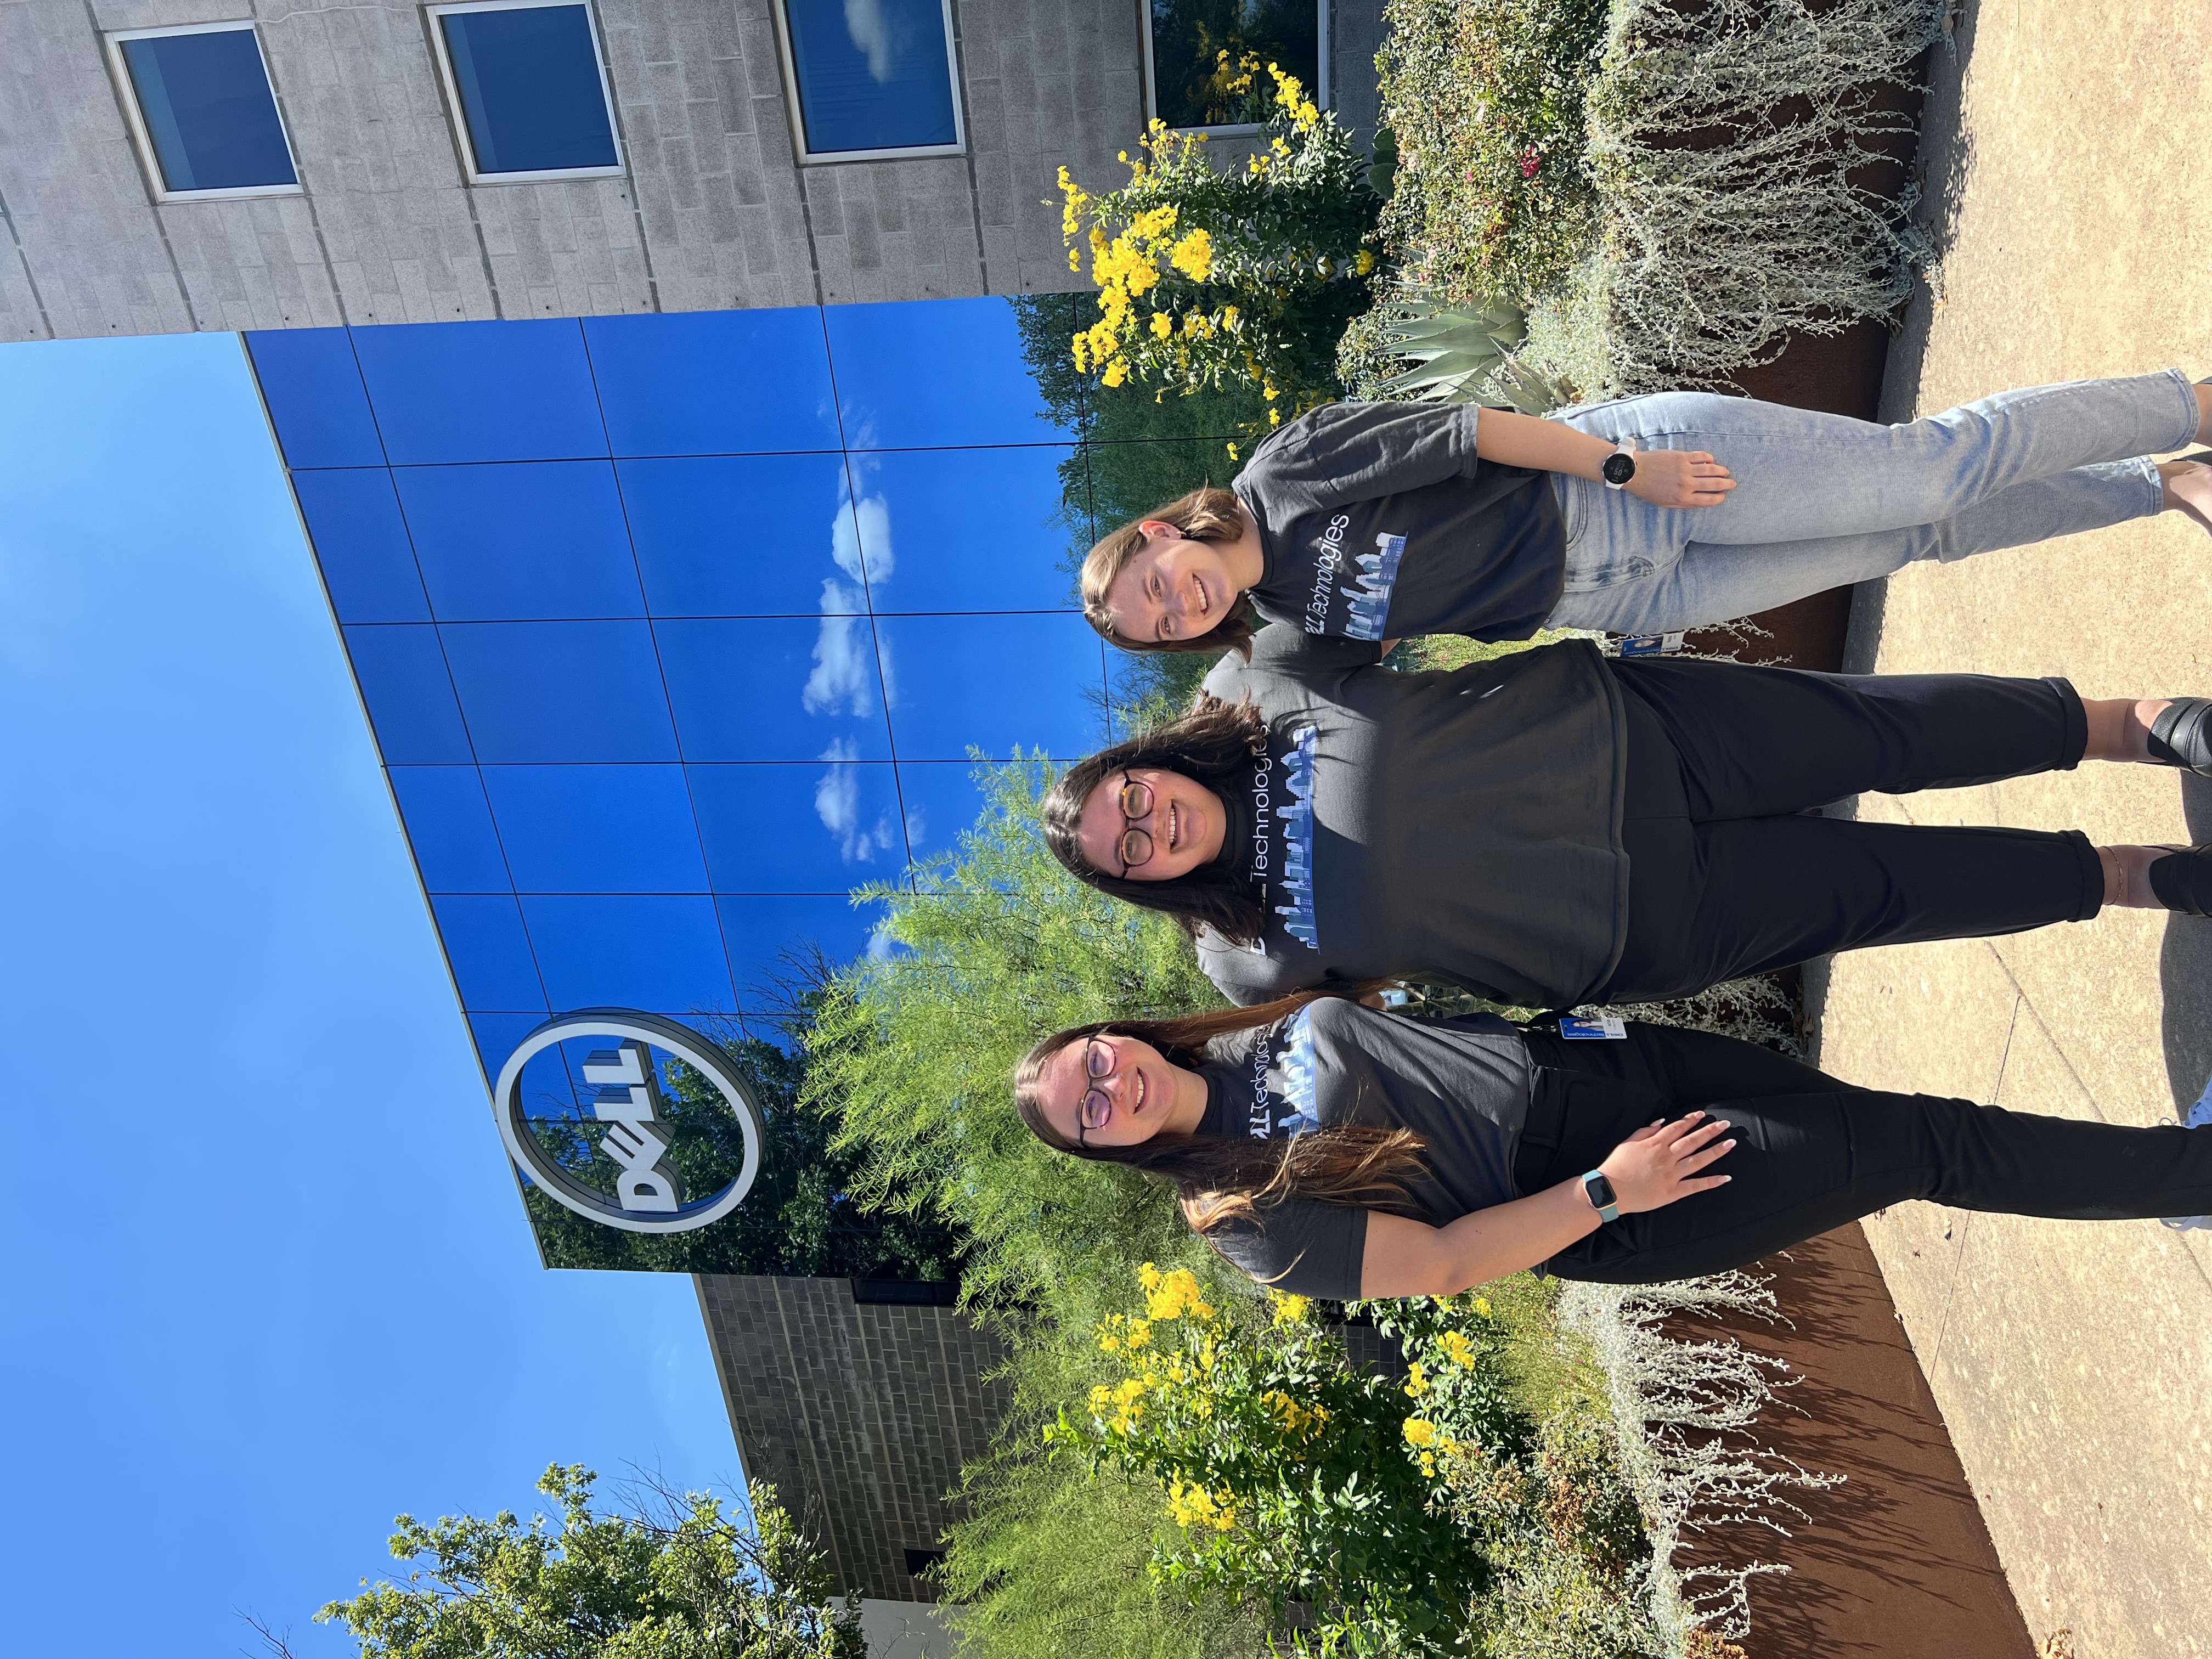 Nova and two other women stand outside a Dell Technologies building in matching Dell Technologies t-shirts.